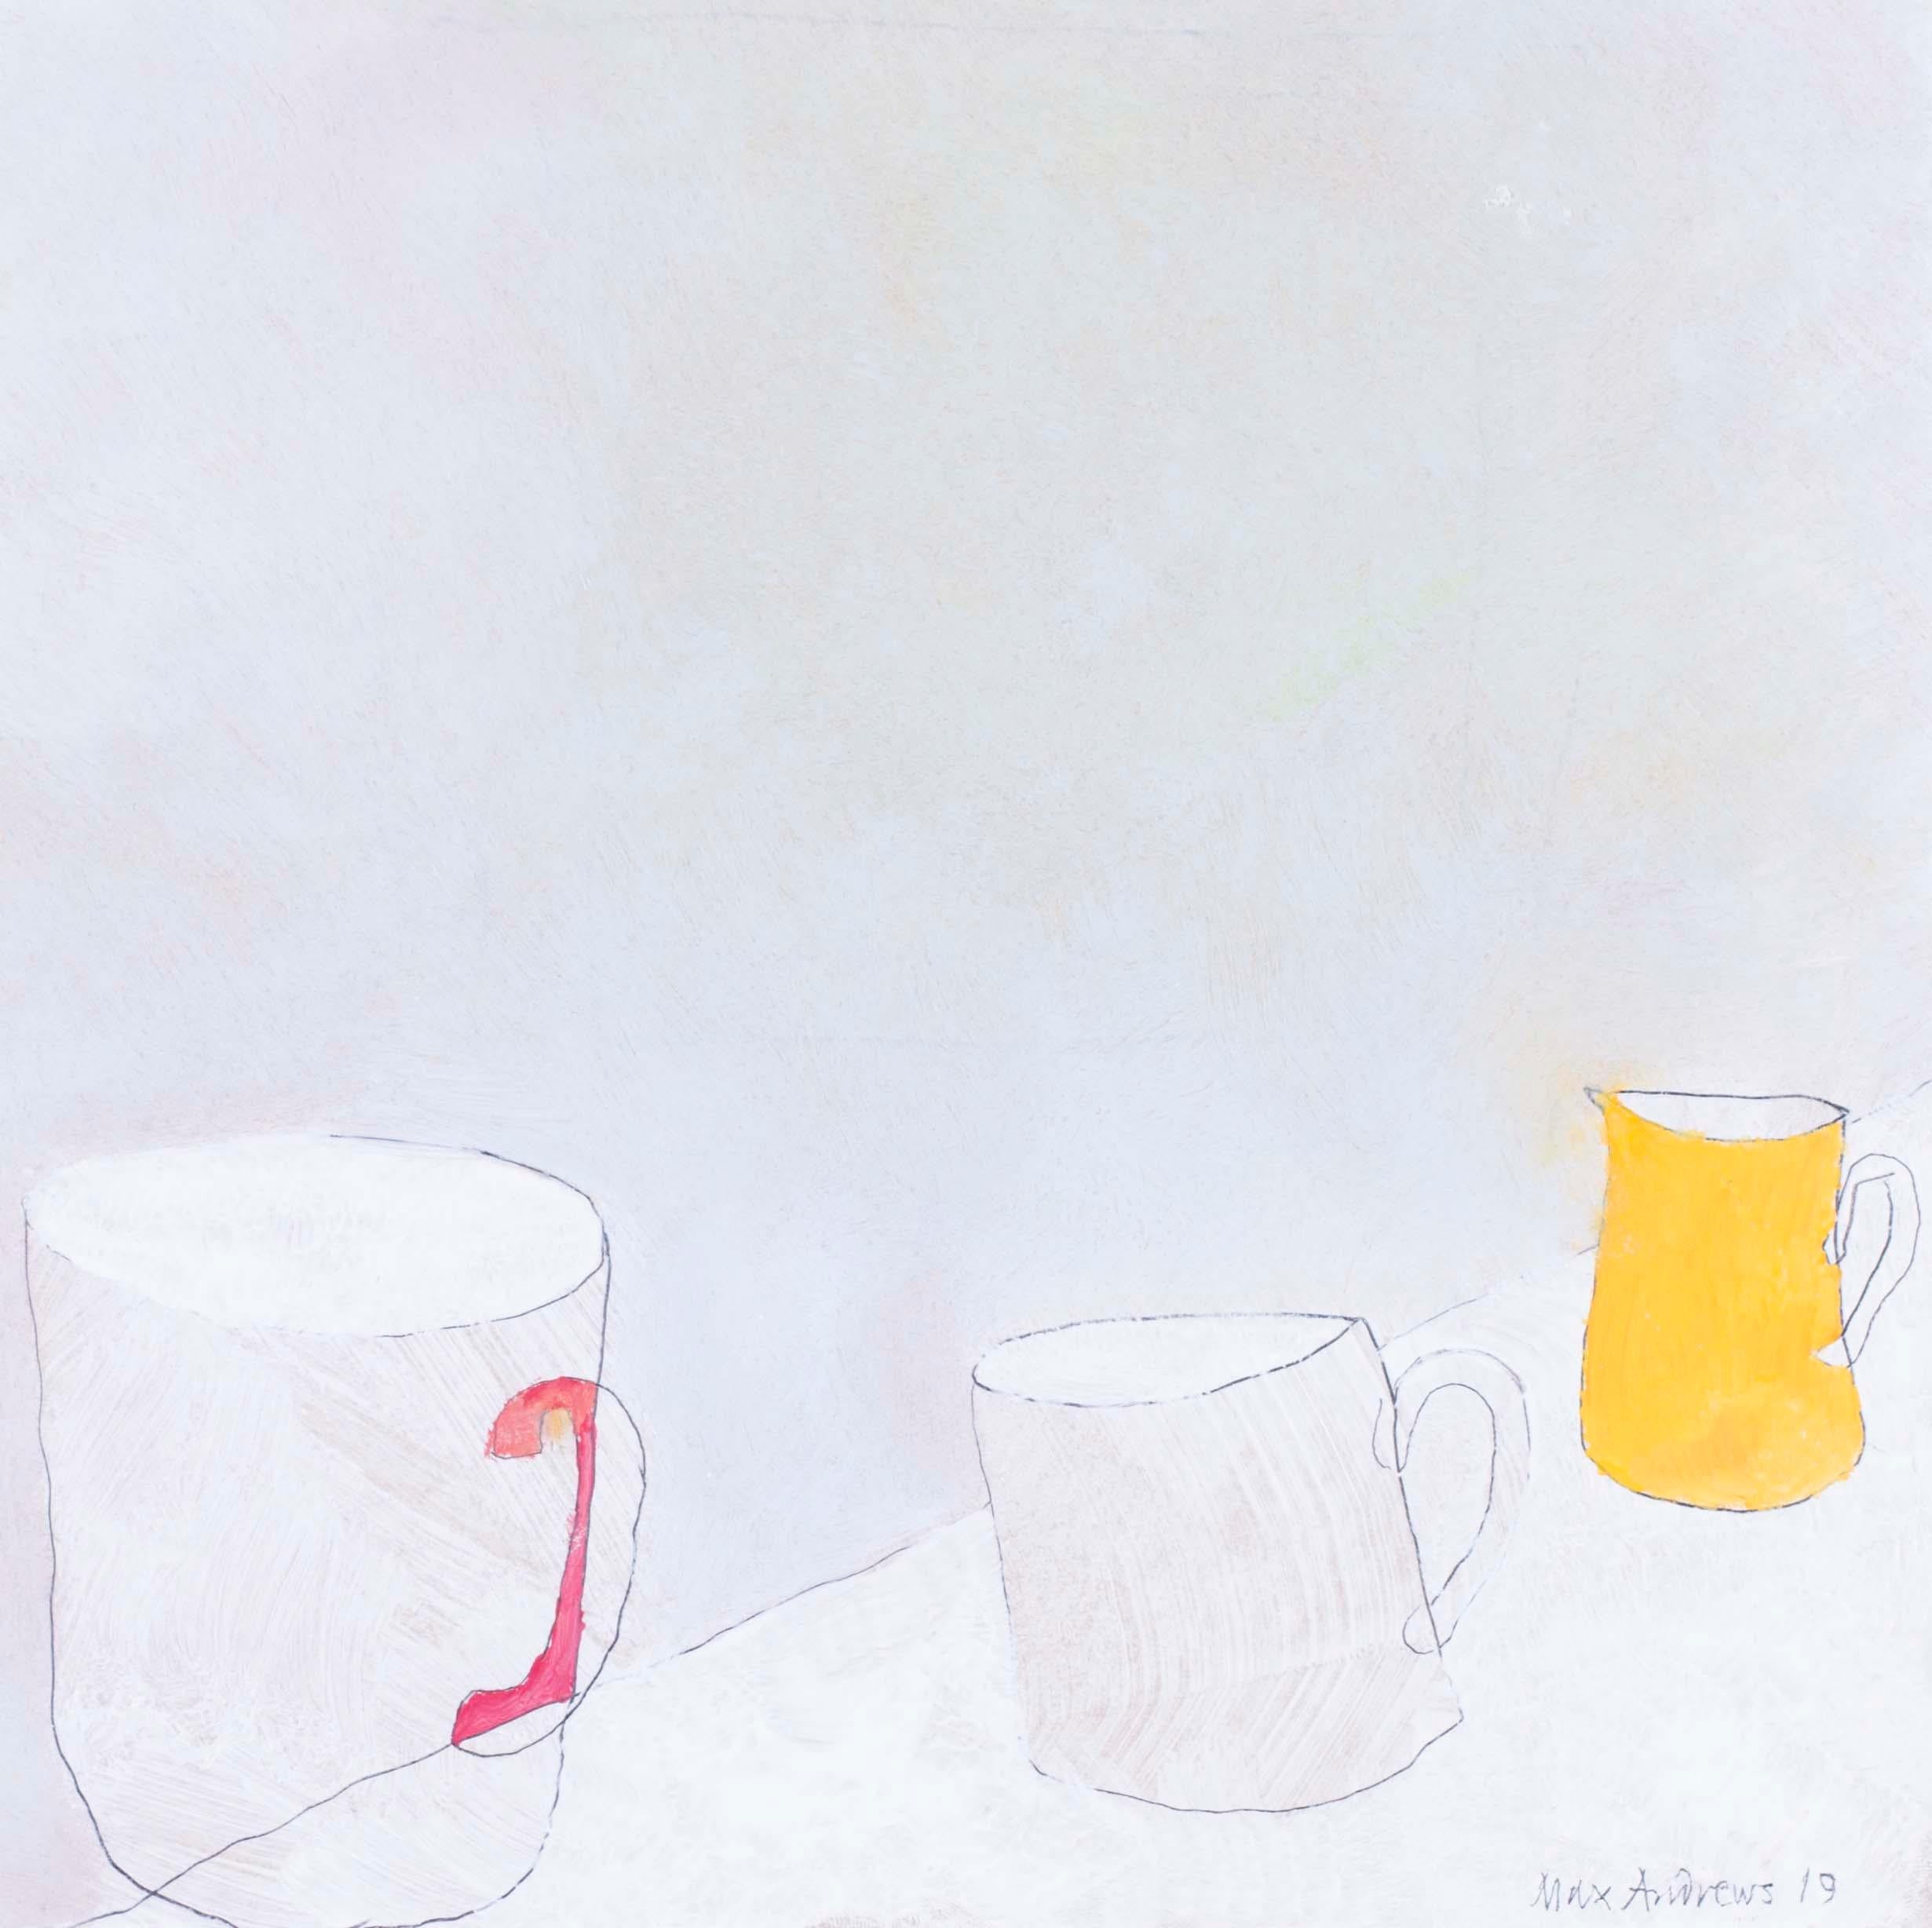 British, 21st Century abstract still life 'Cups' - Painting by Max Andrews